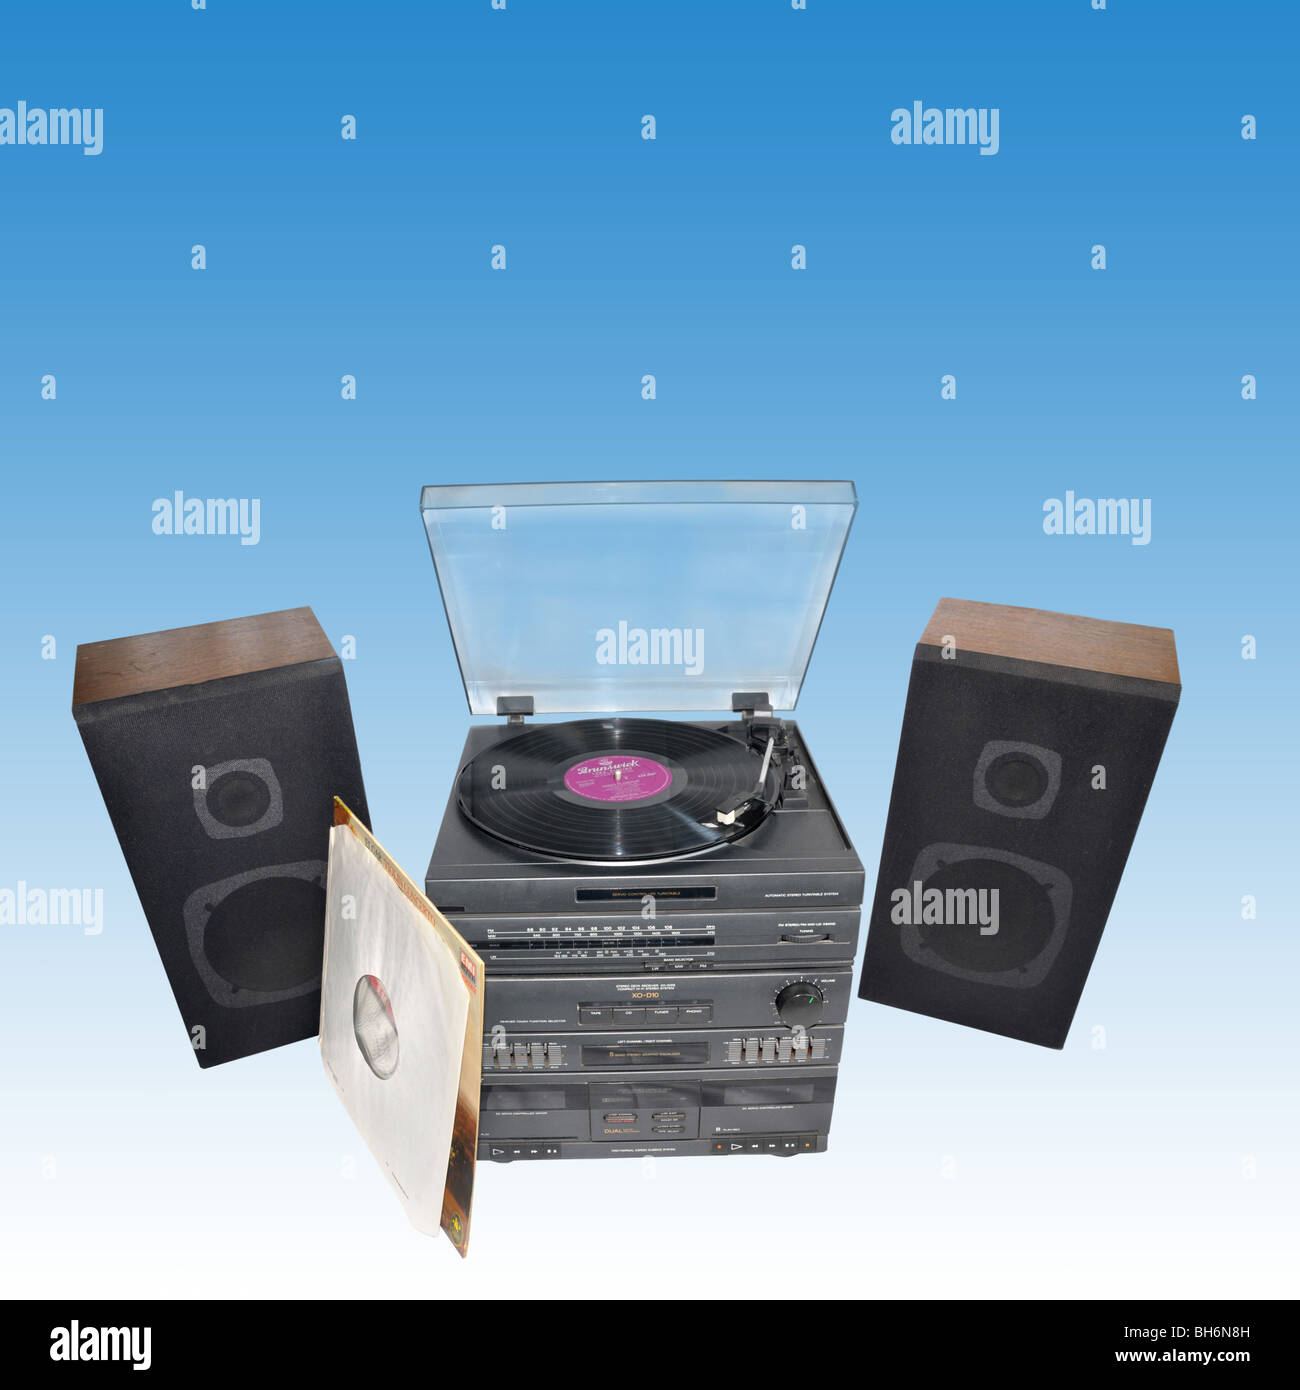 A stereo sound deck system with turntable,  speakers, and an LP with its cover. Stock Photo